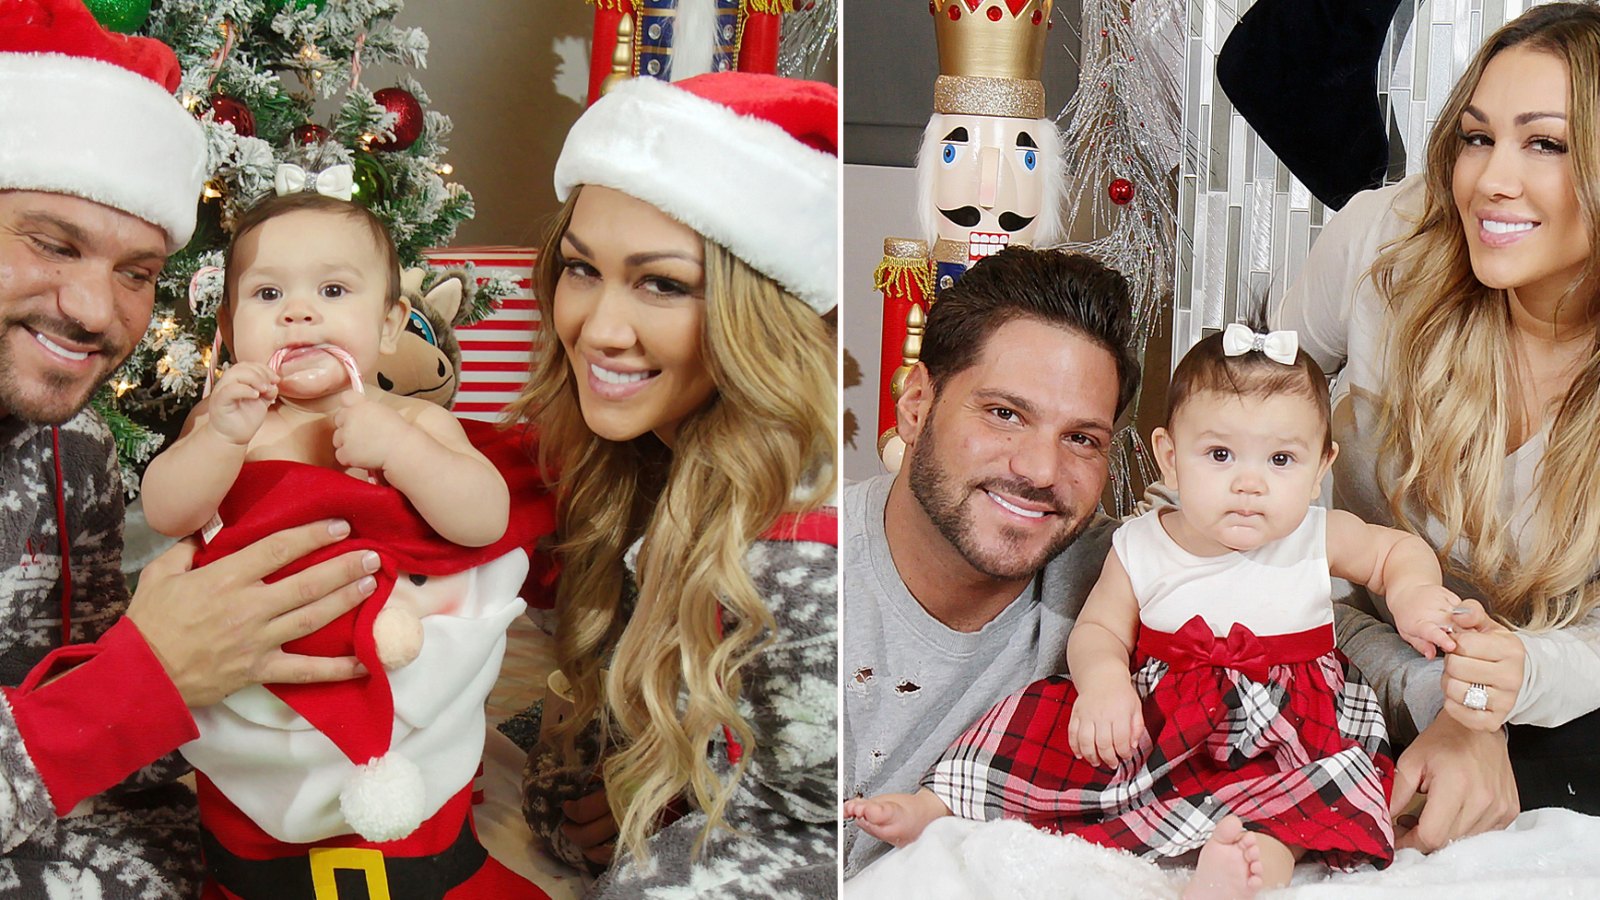 Ronnie Ortiz-Magro and Jen Harley Christmas Card Drama Aside